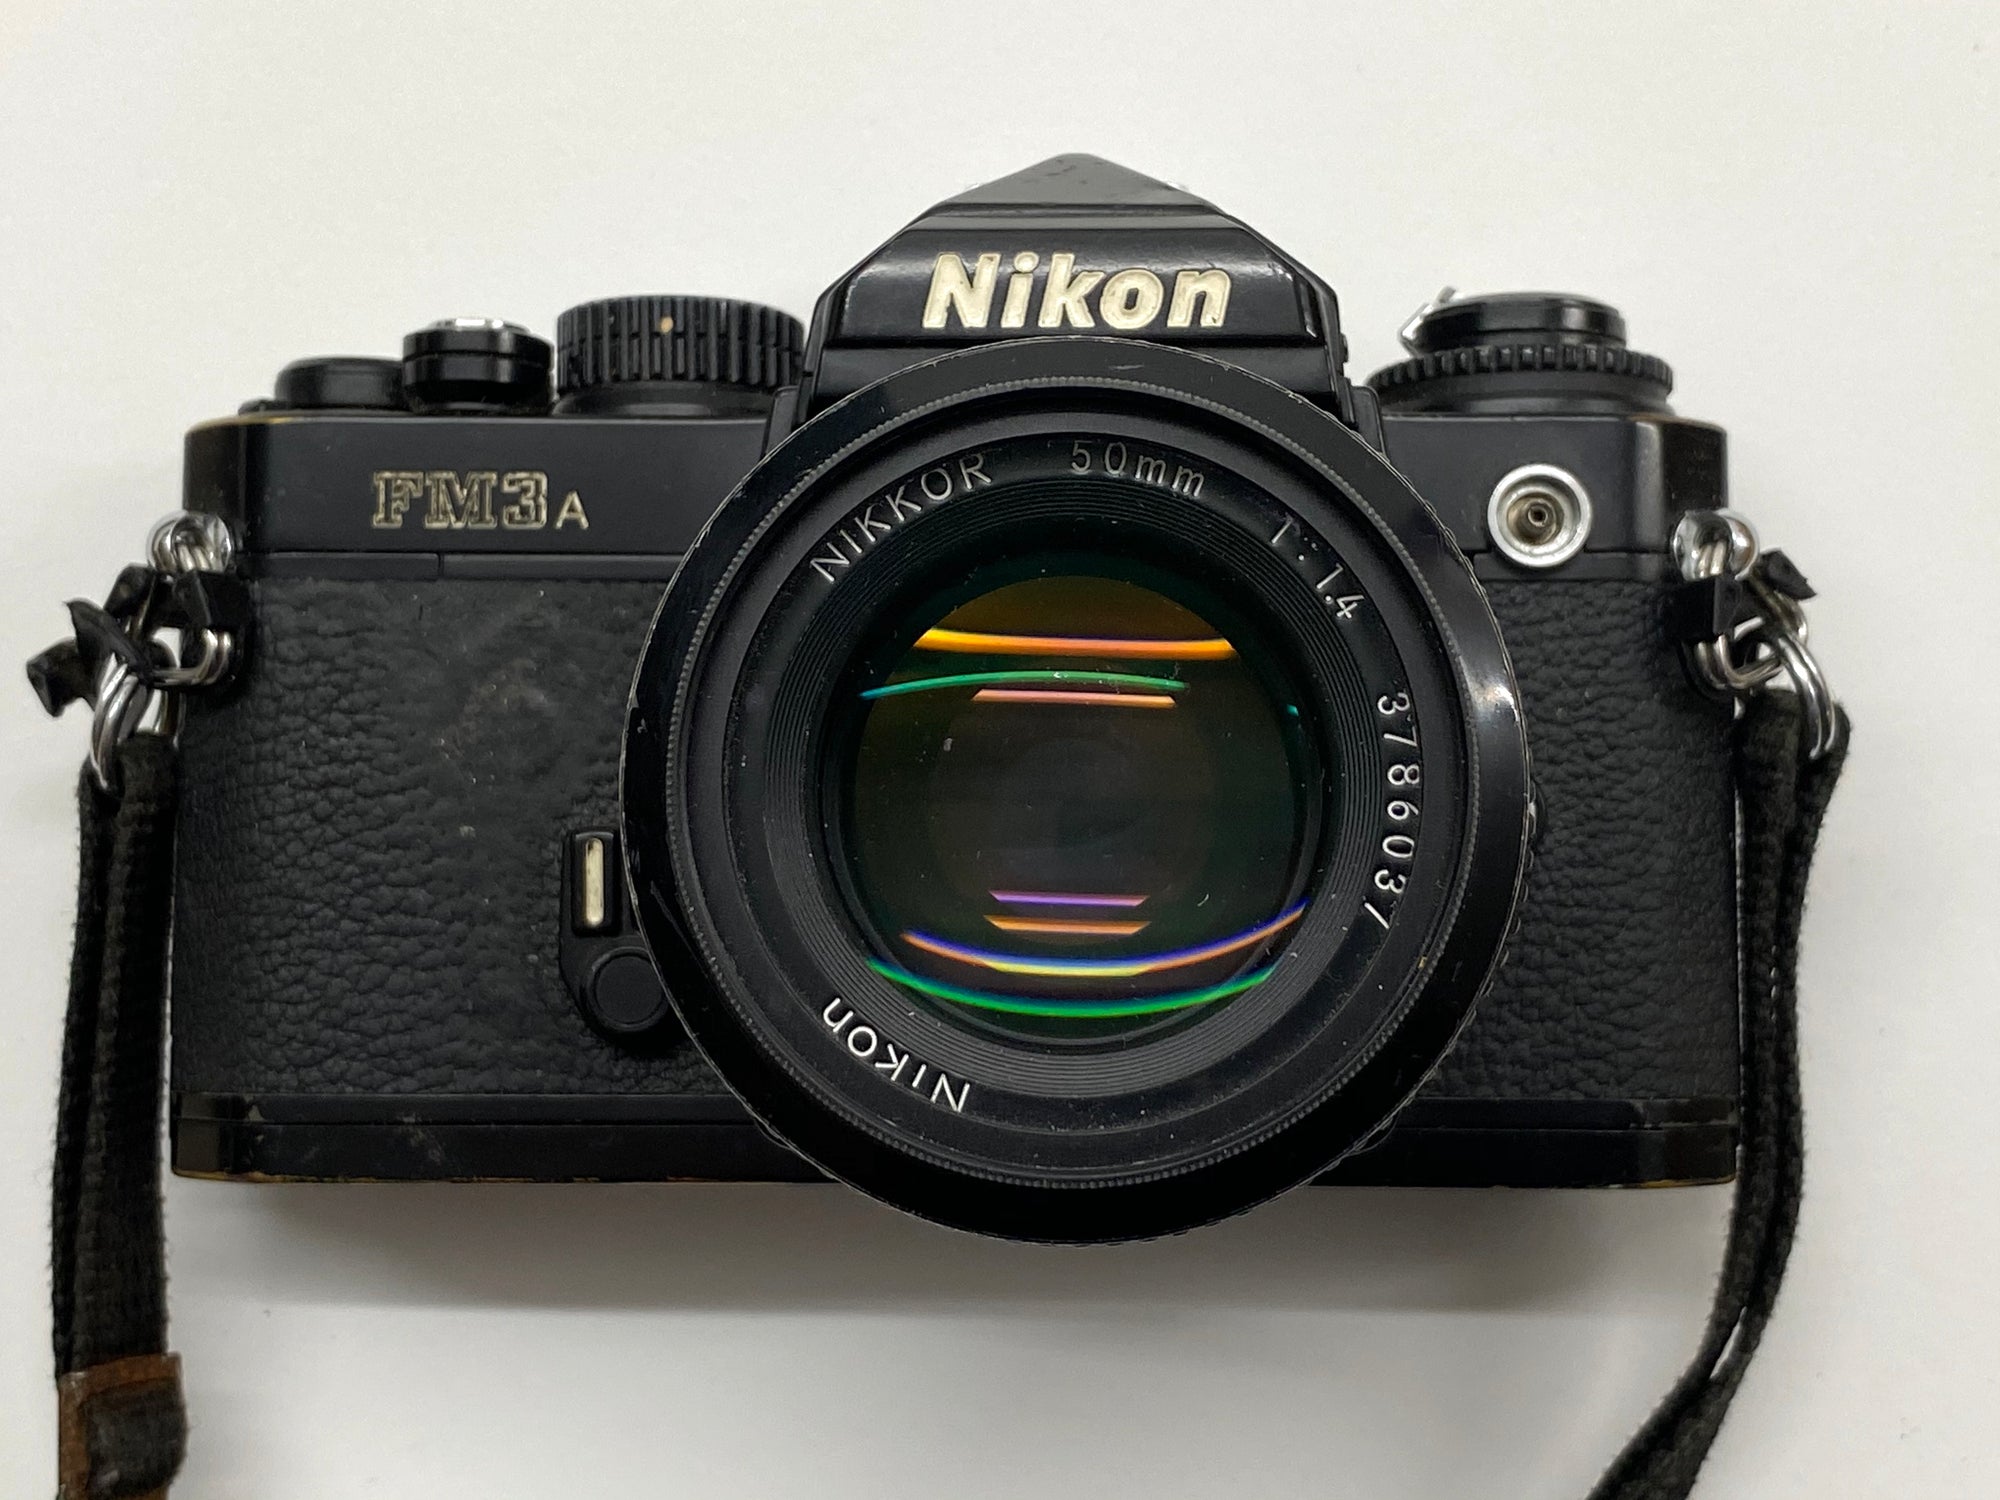 Nikon FM3A owned by photographer Richard Heeps